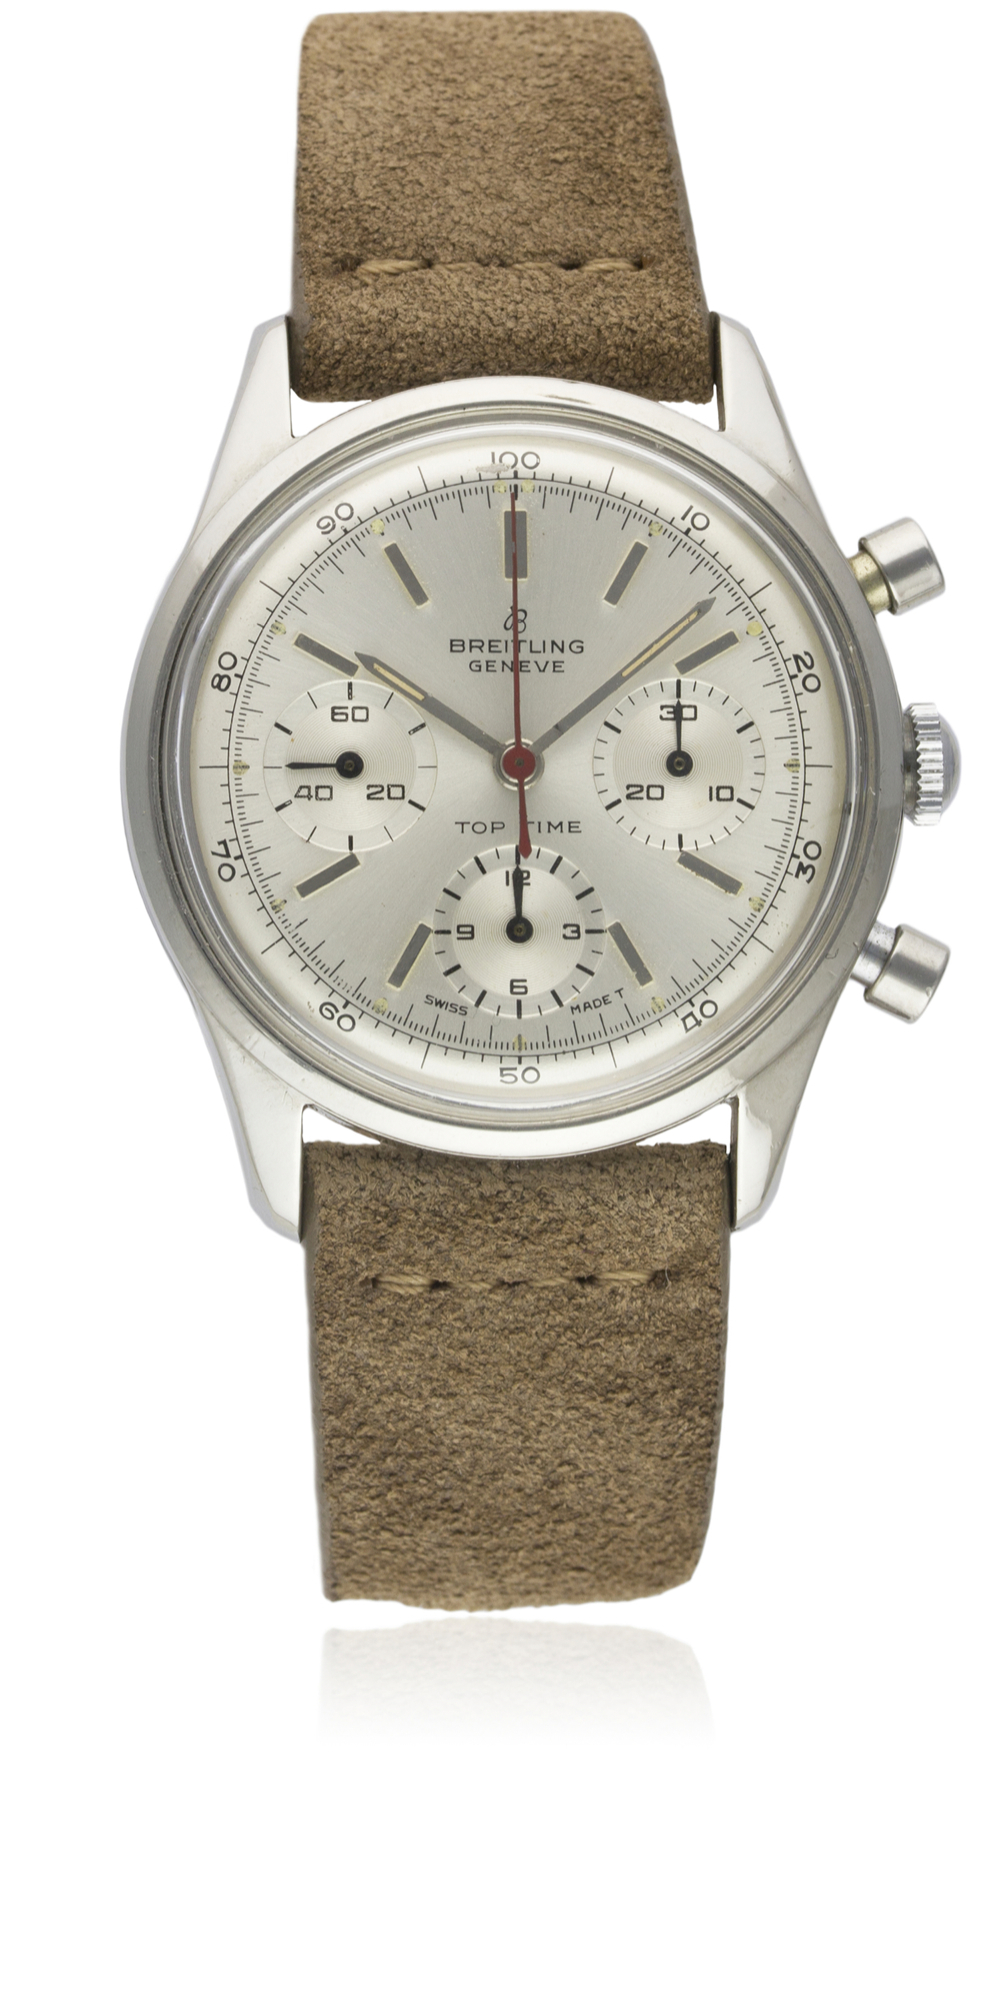 A VERY RARE GENTLEMAN'S STAINLESS STEEL BREITLING TOP TIME CHRONOGRAPH WRIST WATCH CIRCA 1964, - Image 3 of 10